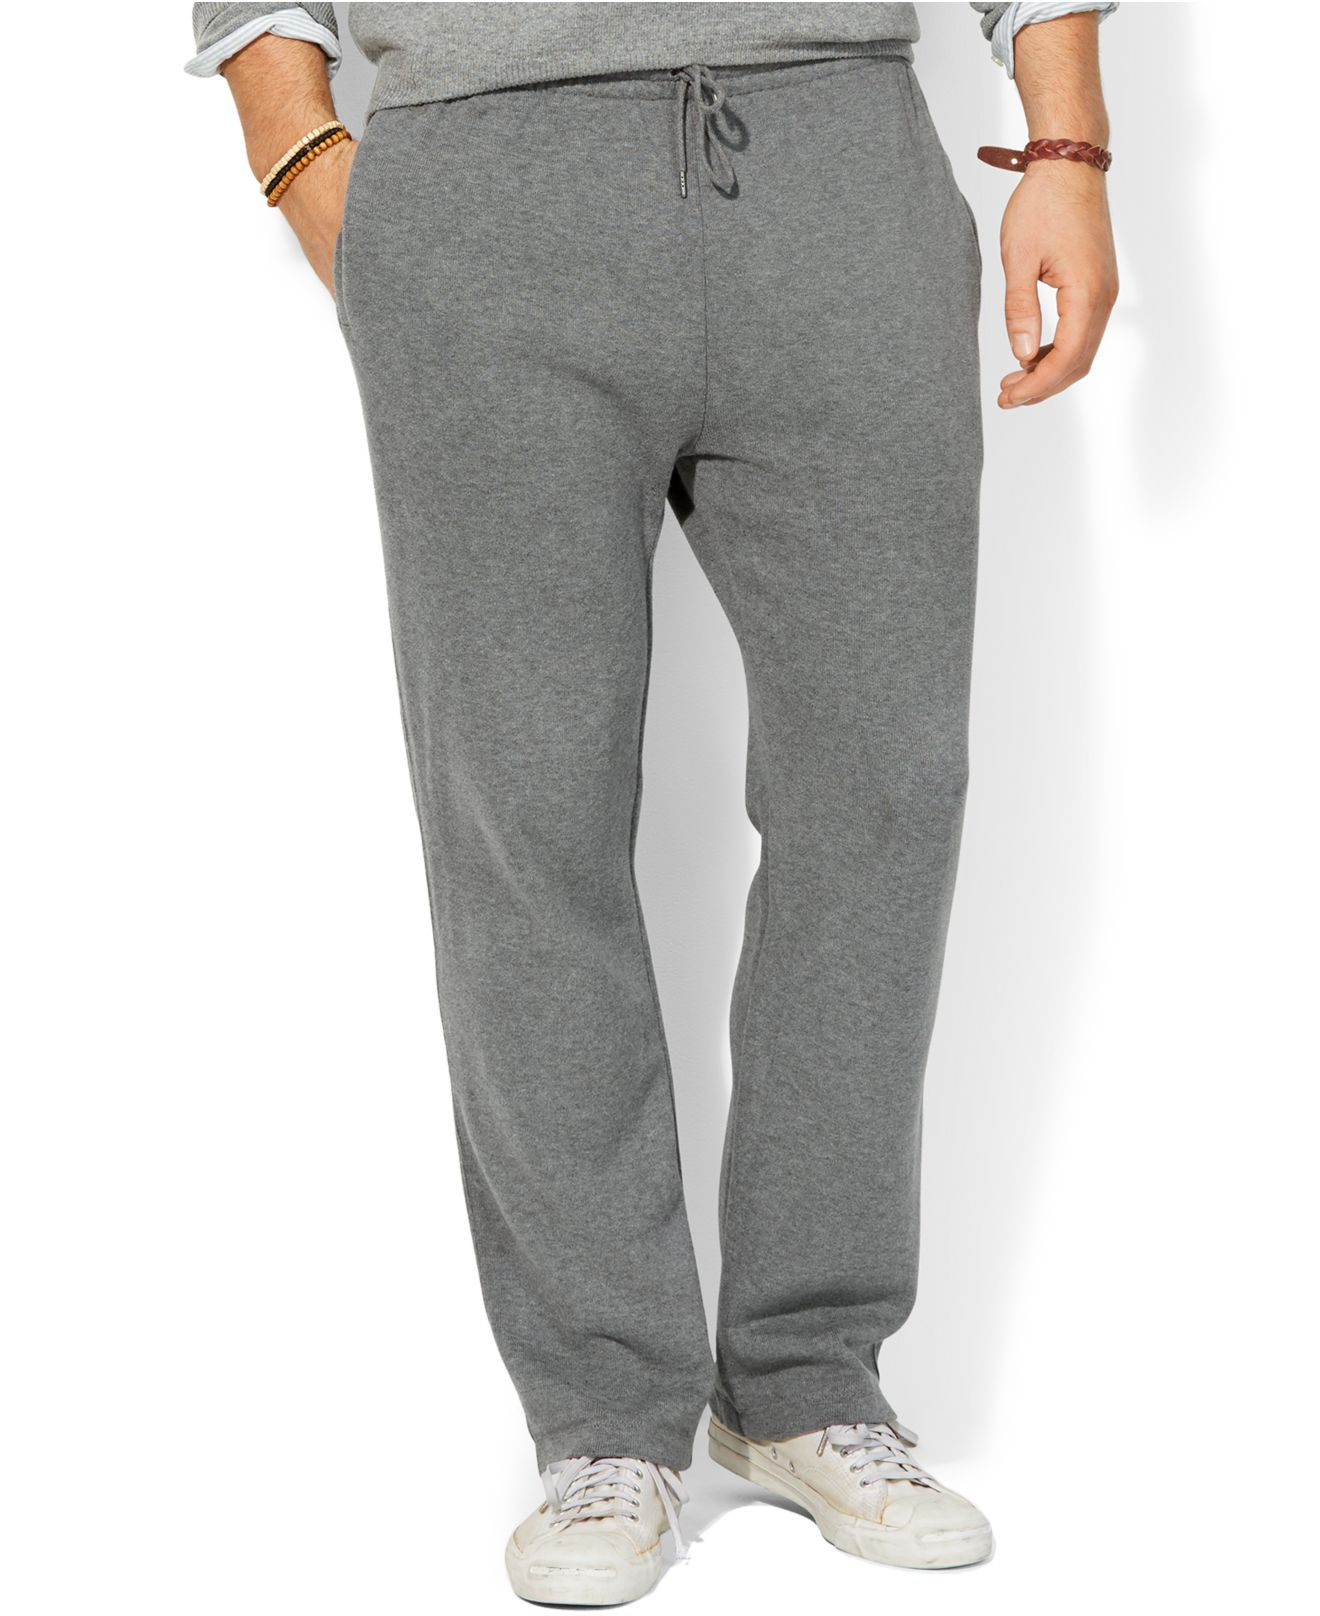 Polo Ralph Lauren Big And Tall French-Rib Sweatpants in Gray for Men - Lyst